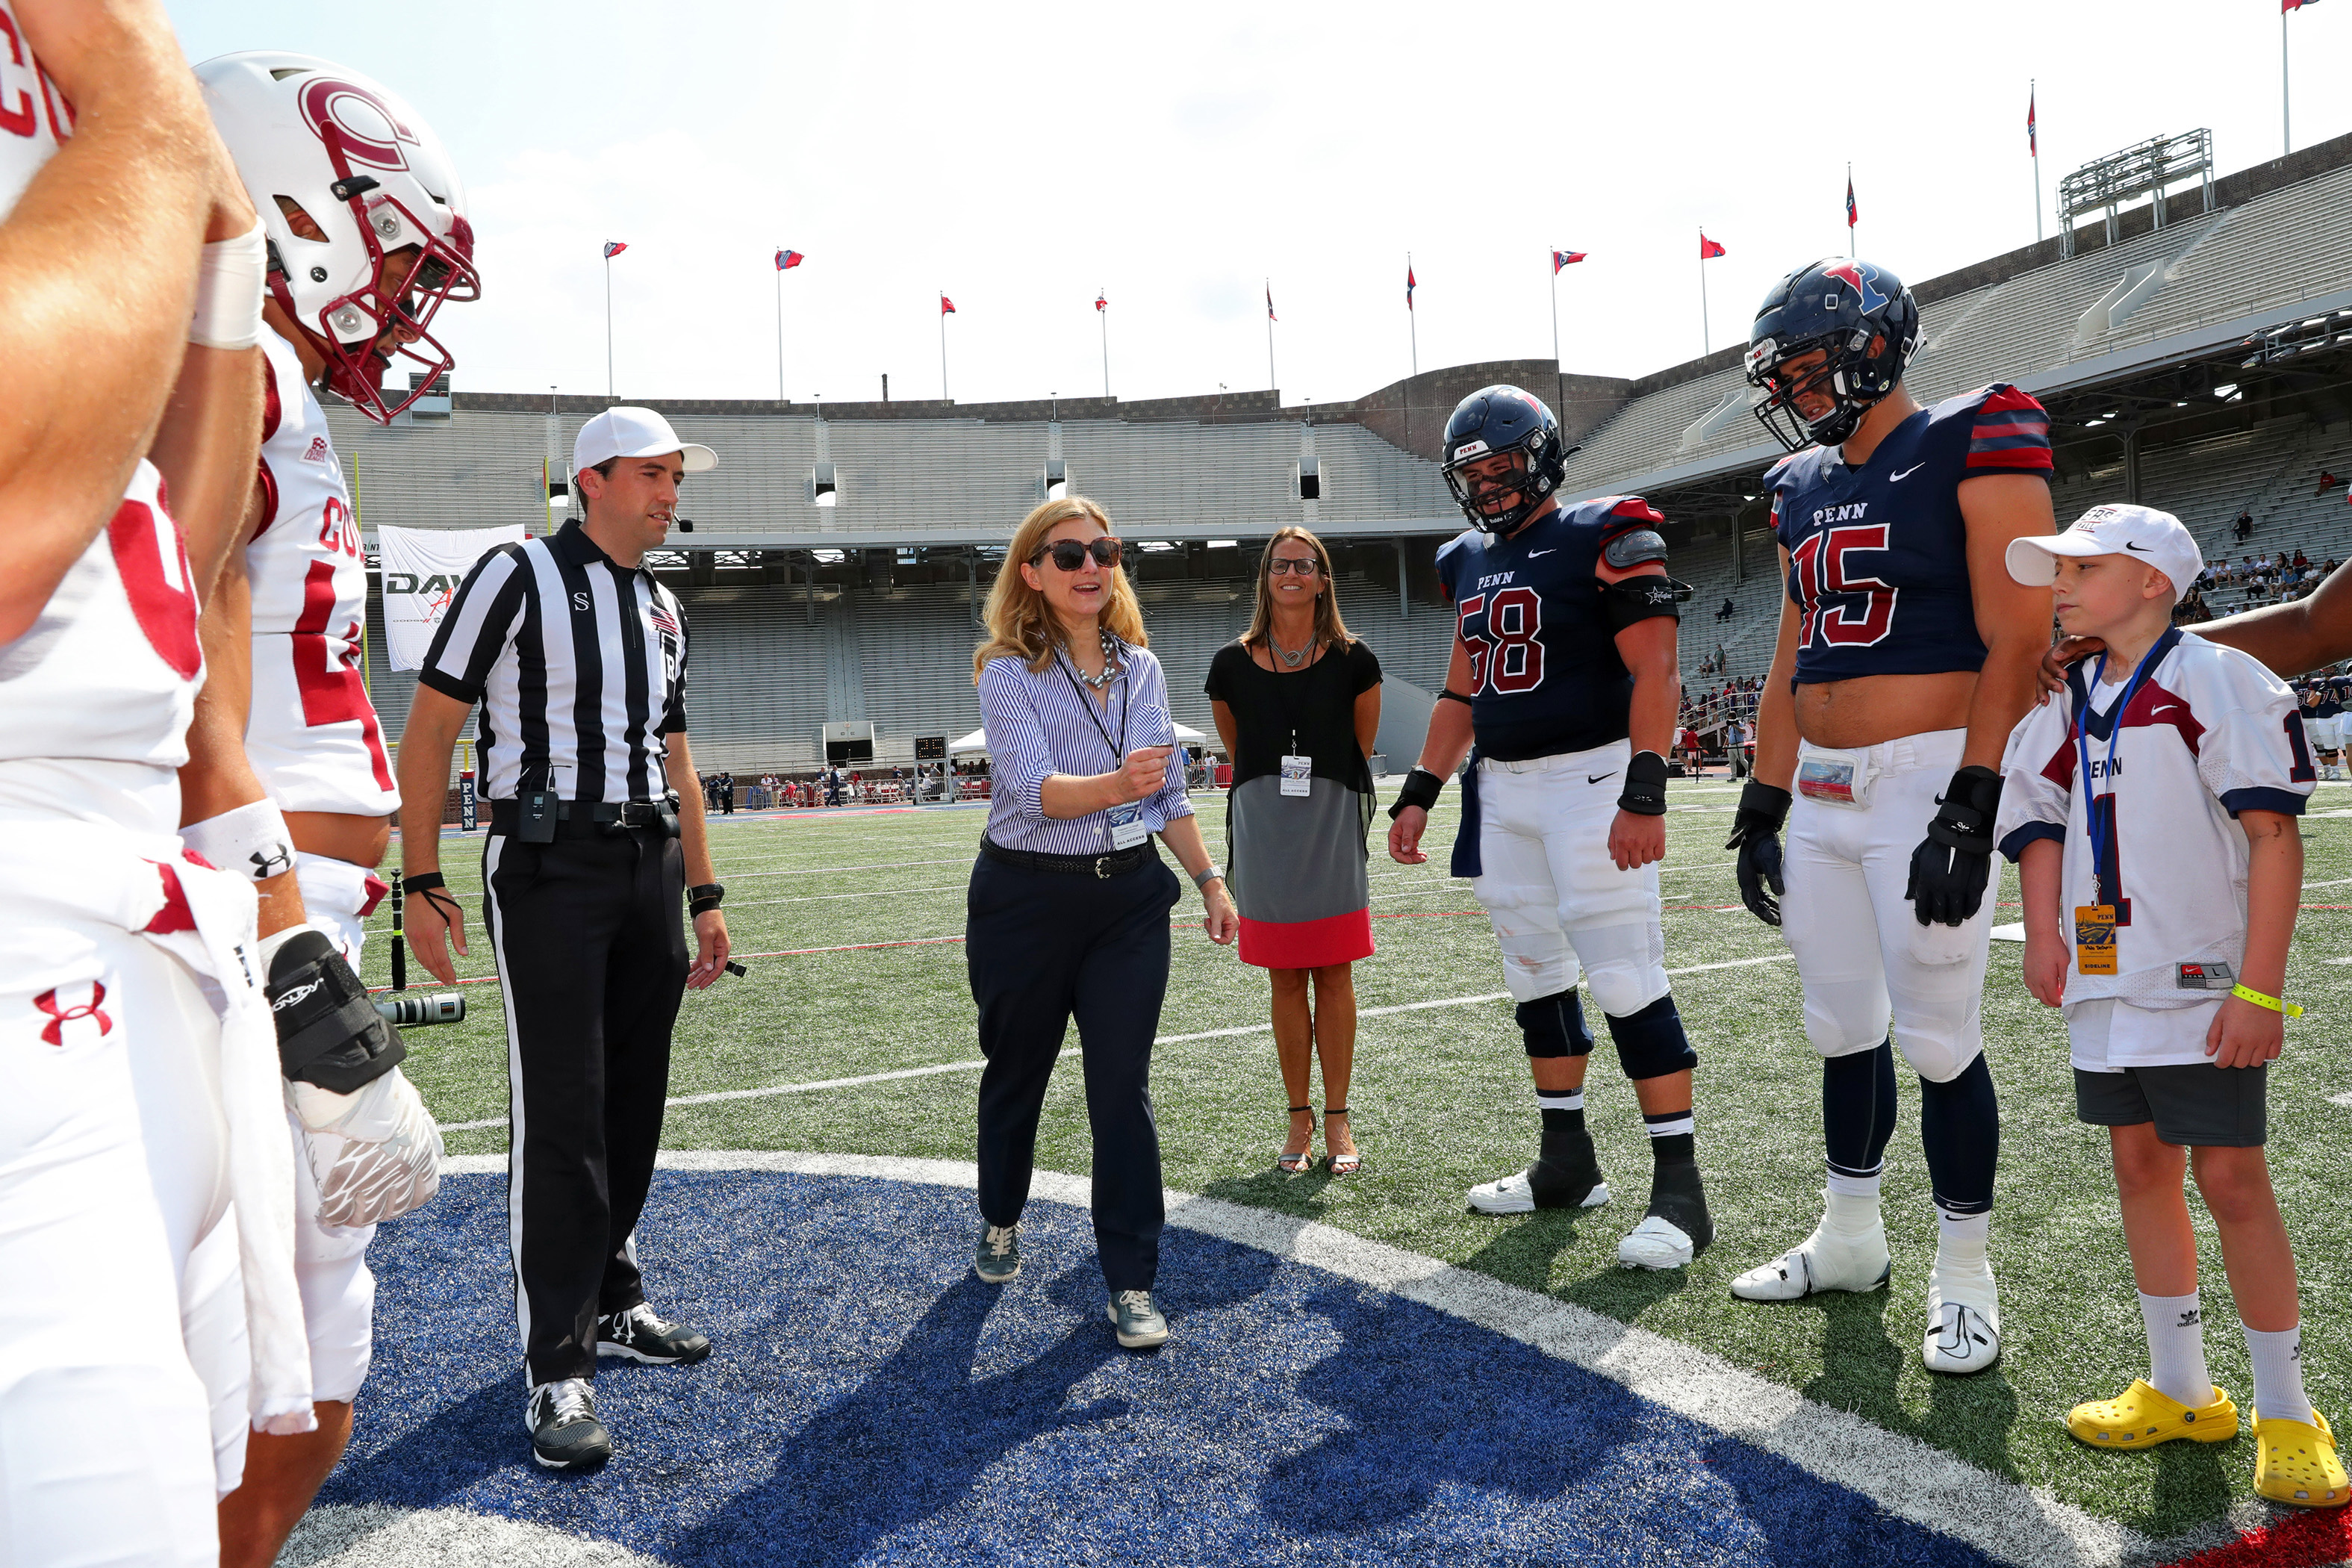 President Liz Magill does the coin toss before the Penn vs. Colgate football game on Saturday at Franklin Field.